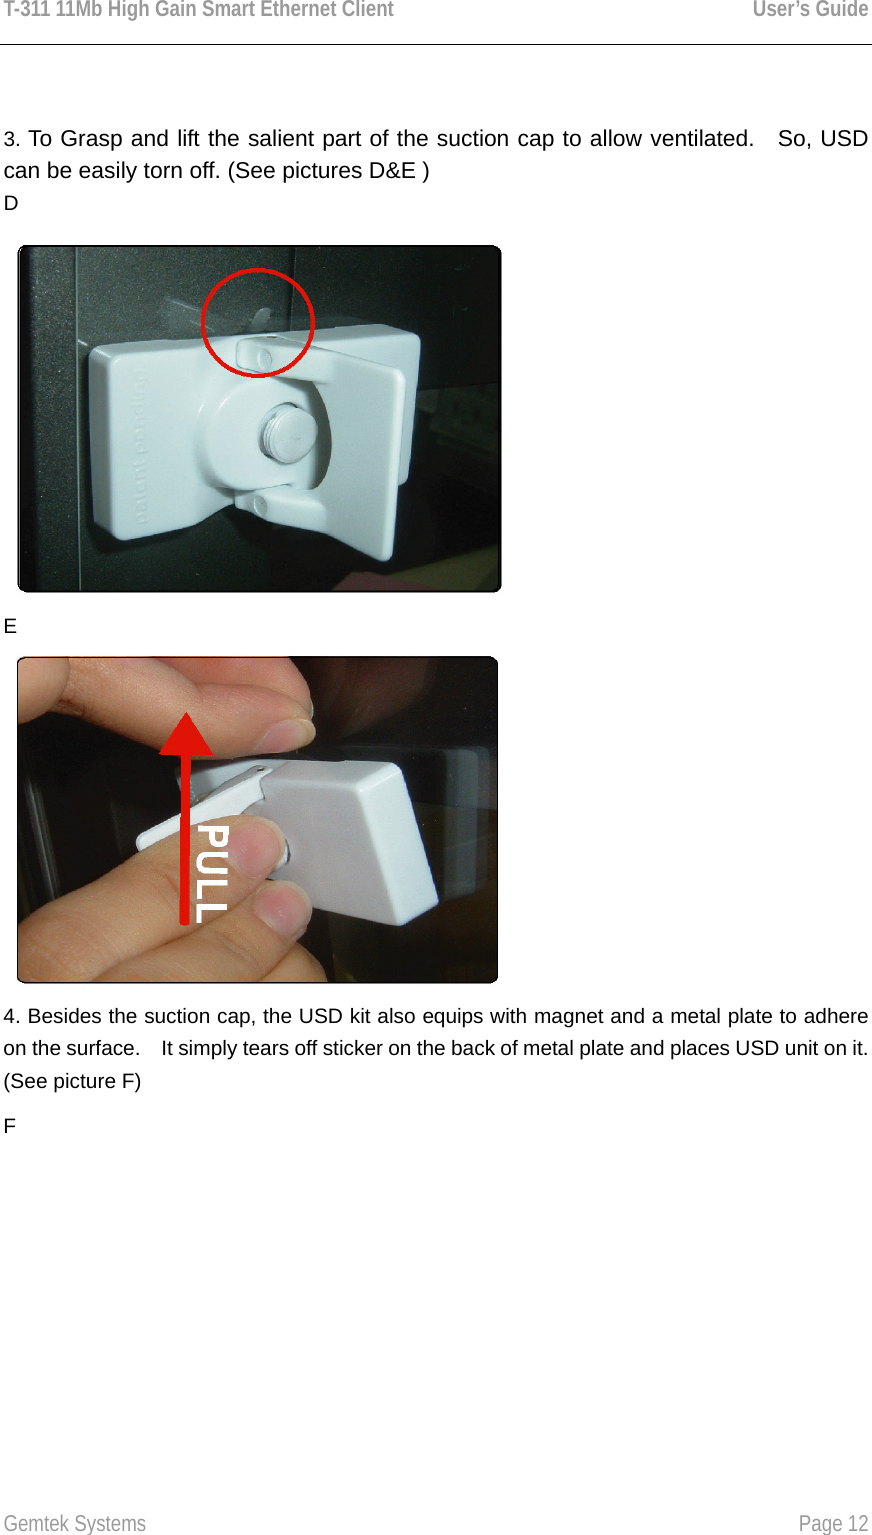 T-311 11Mb High Gain Smart Ethernet Client    User’s Guide  Gemtek Systems    Page 12    3. To Grasp and lift the salient part of the suction cap to allow ventilated.  So, USD can be easily torn off. (See pictures D&amp;E ) D  E  4. Besides the suction cap, the USD kit also equips with magnet and a metal plate to adhere on the surface.    It simply tears off sticker on the back of metal plate and places USD unit on it. (See picture F) F 